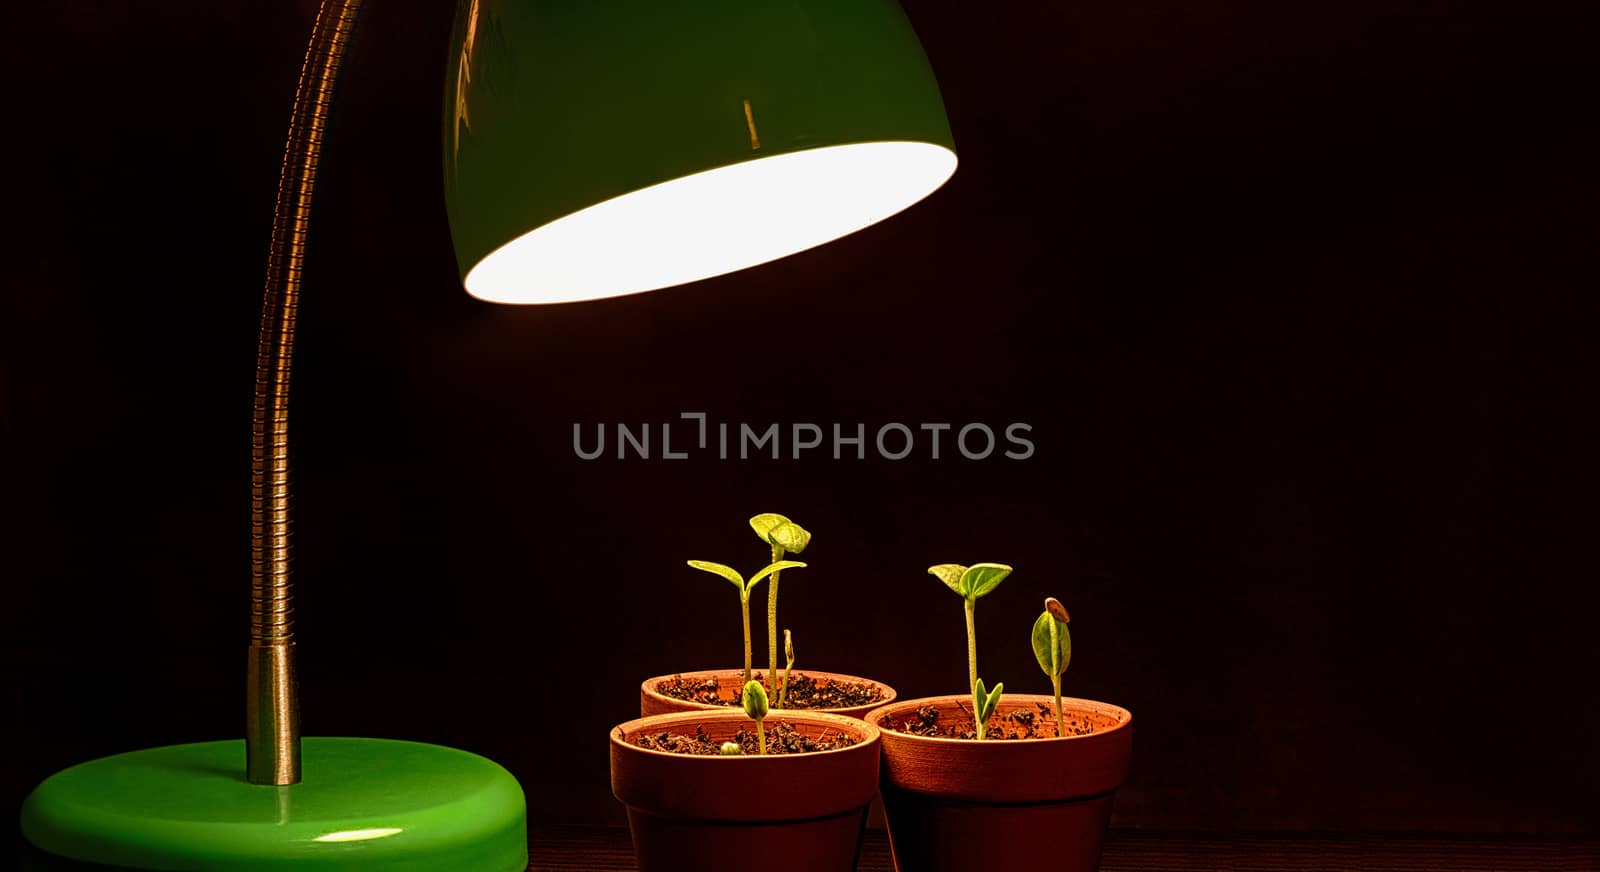 Three seedlings grow under the influence of a plant growth light.  Great metaphorical image to symbolize business mentoring, training, support